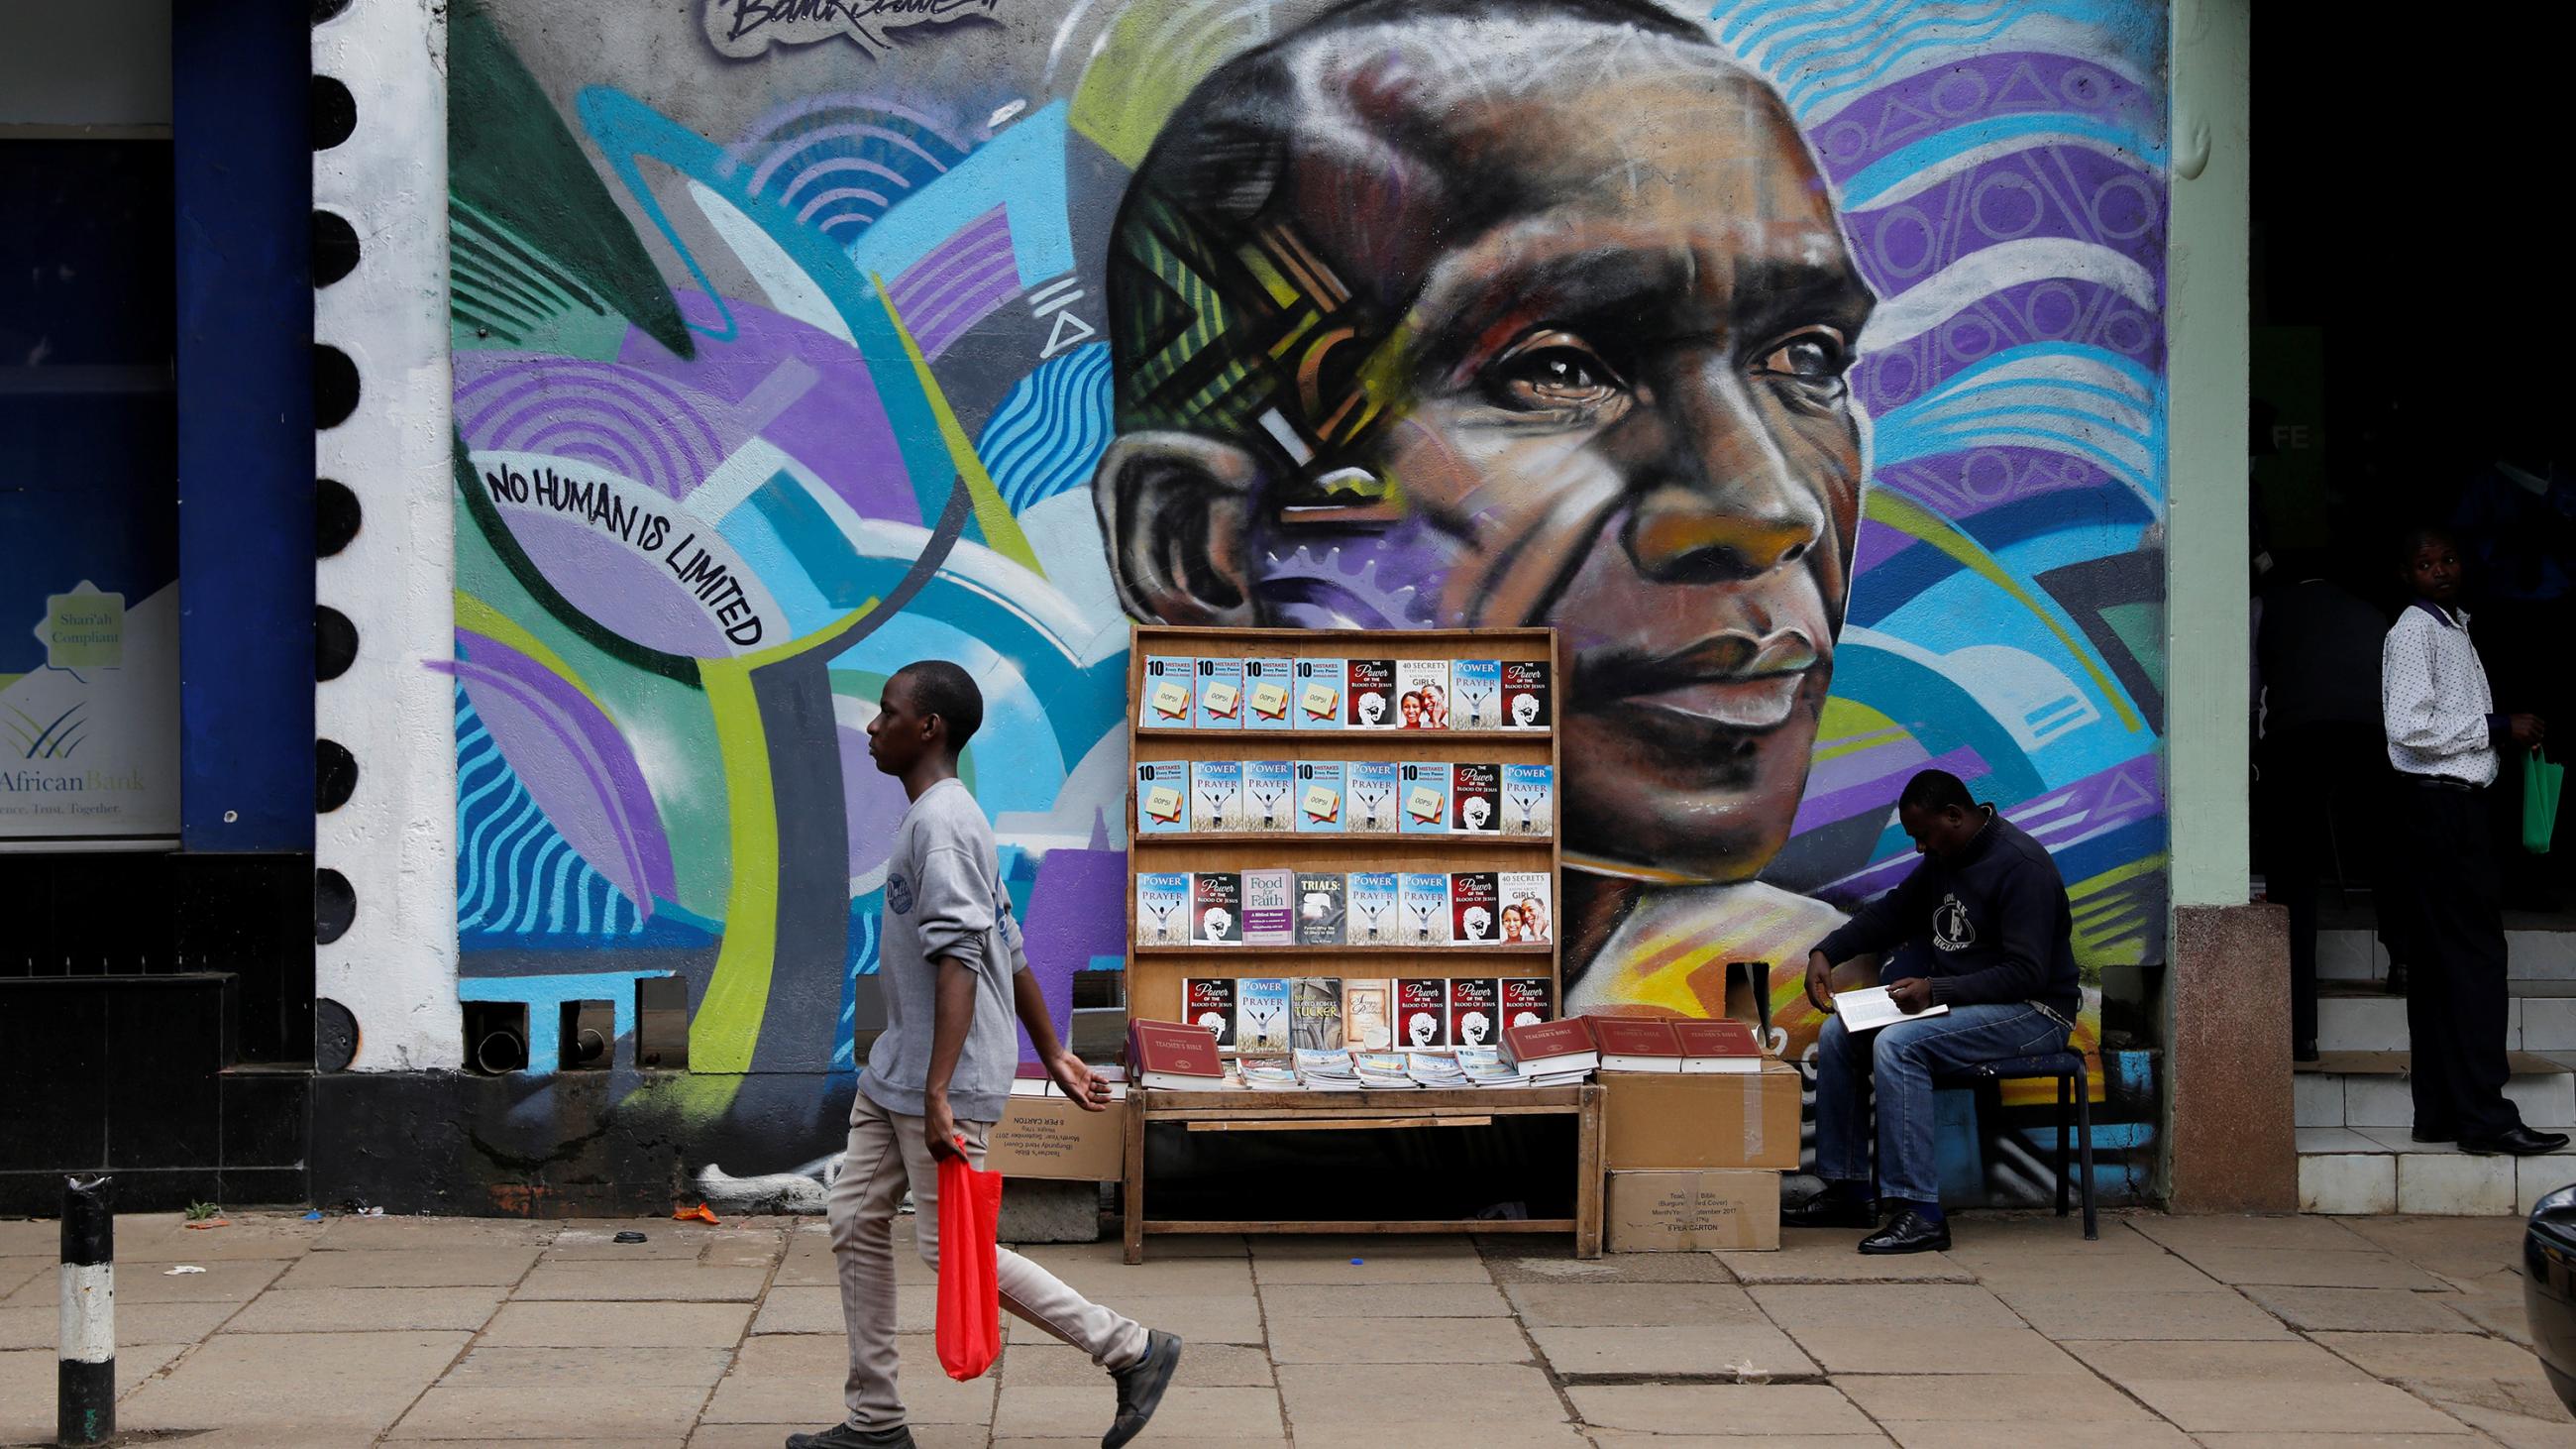 The photo shows a man walking past a huge mural of the marathoner with a street vendor standing in front. 